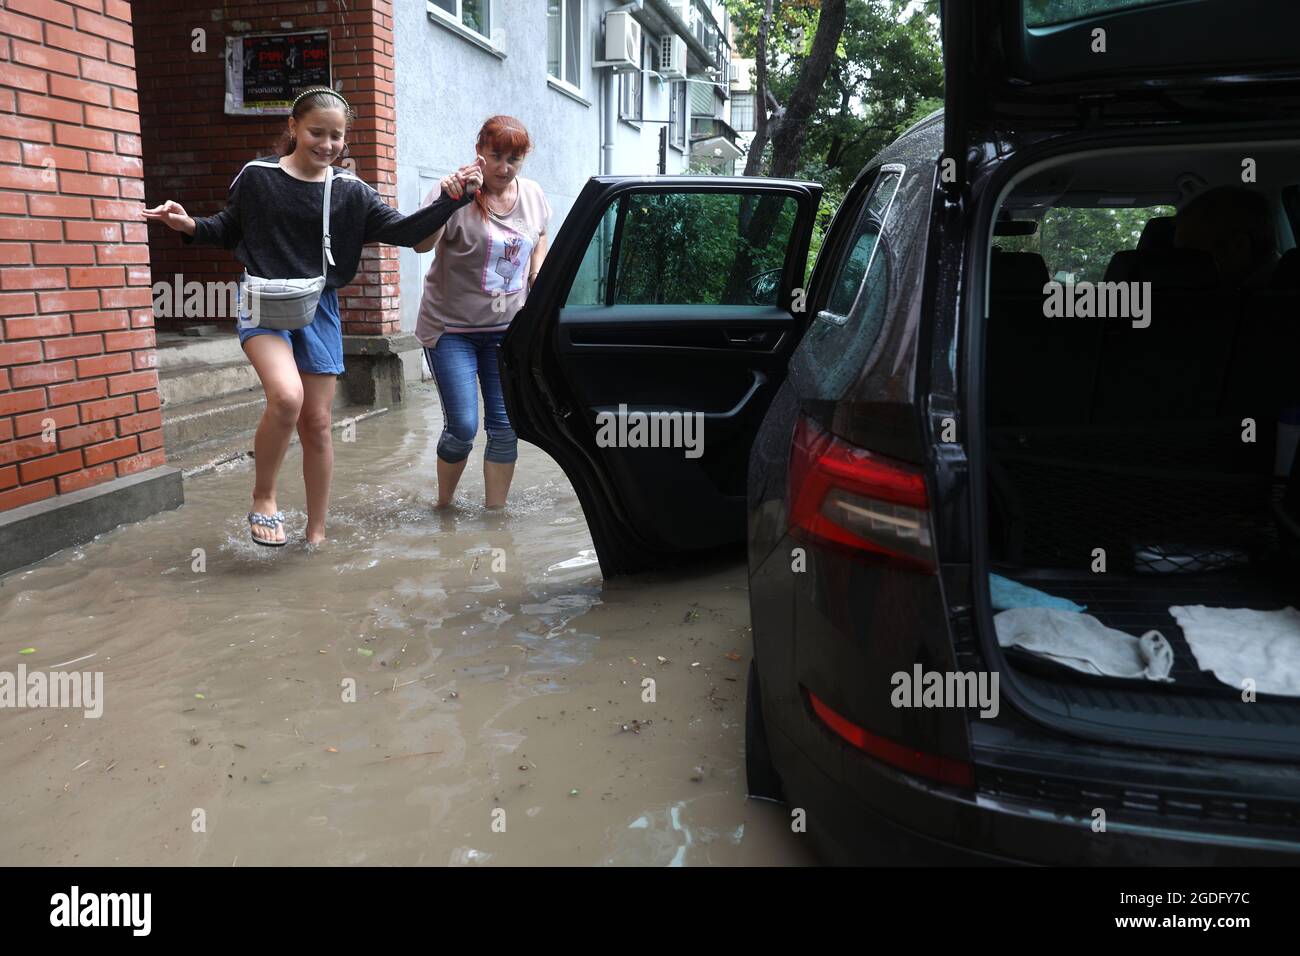 Kerch, Crimea, Russia. 13th Aug, 2021. Local residents leave a flood-hit  area in the city of Kerch. Heavy rains caused a rise in water levels in  local rivers which led to the